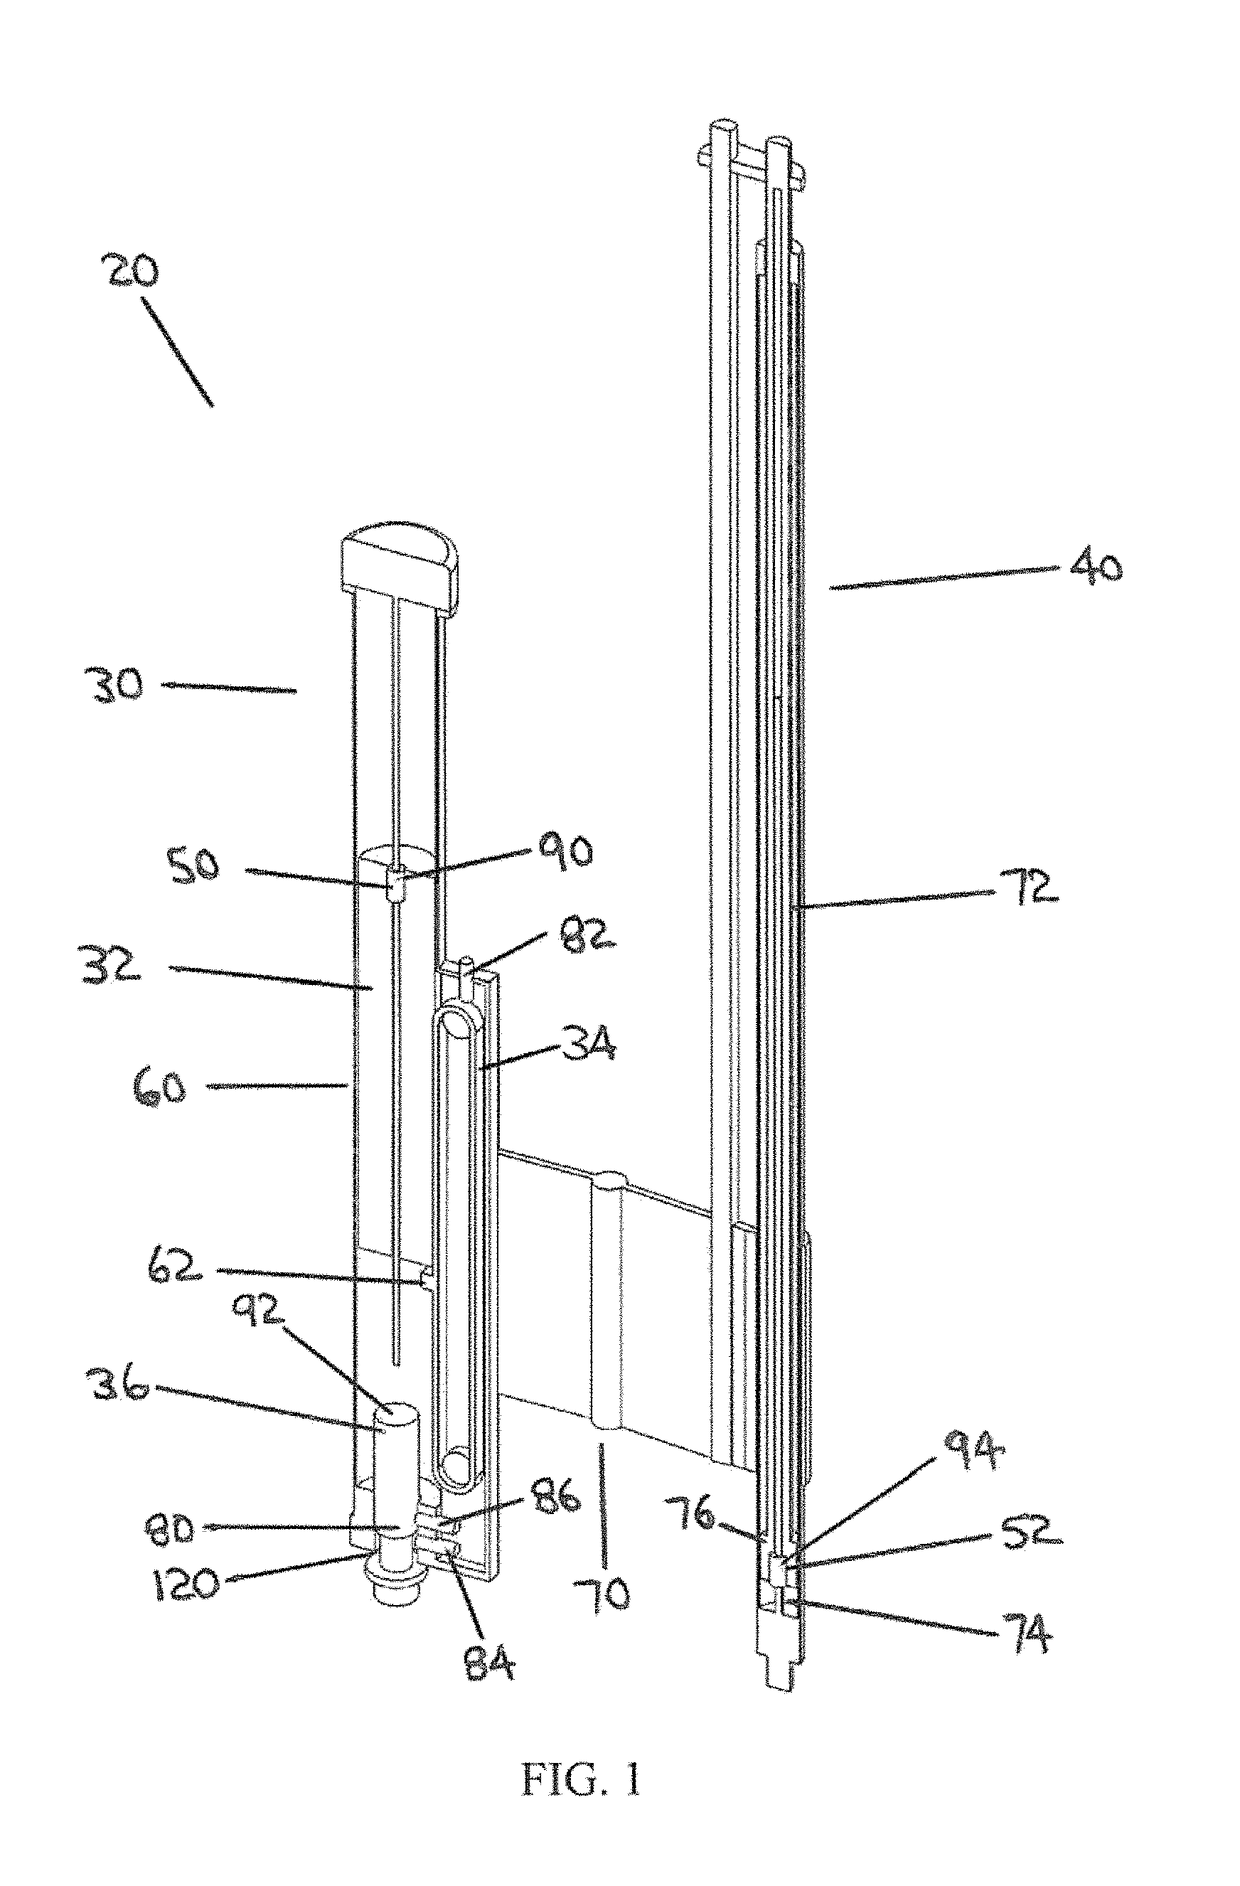 An apparatus and a method for performing a standard penetration test